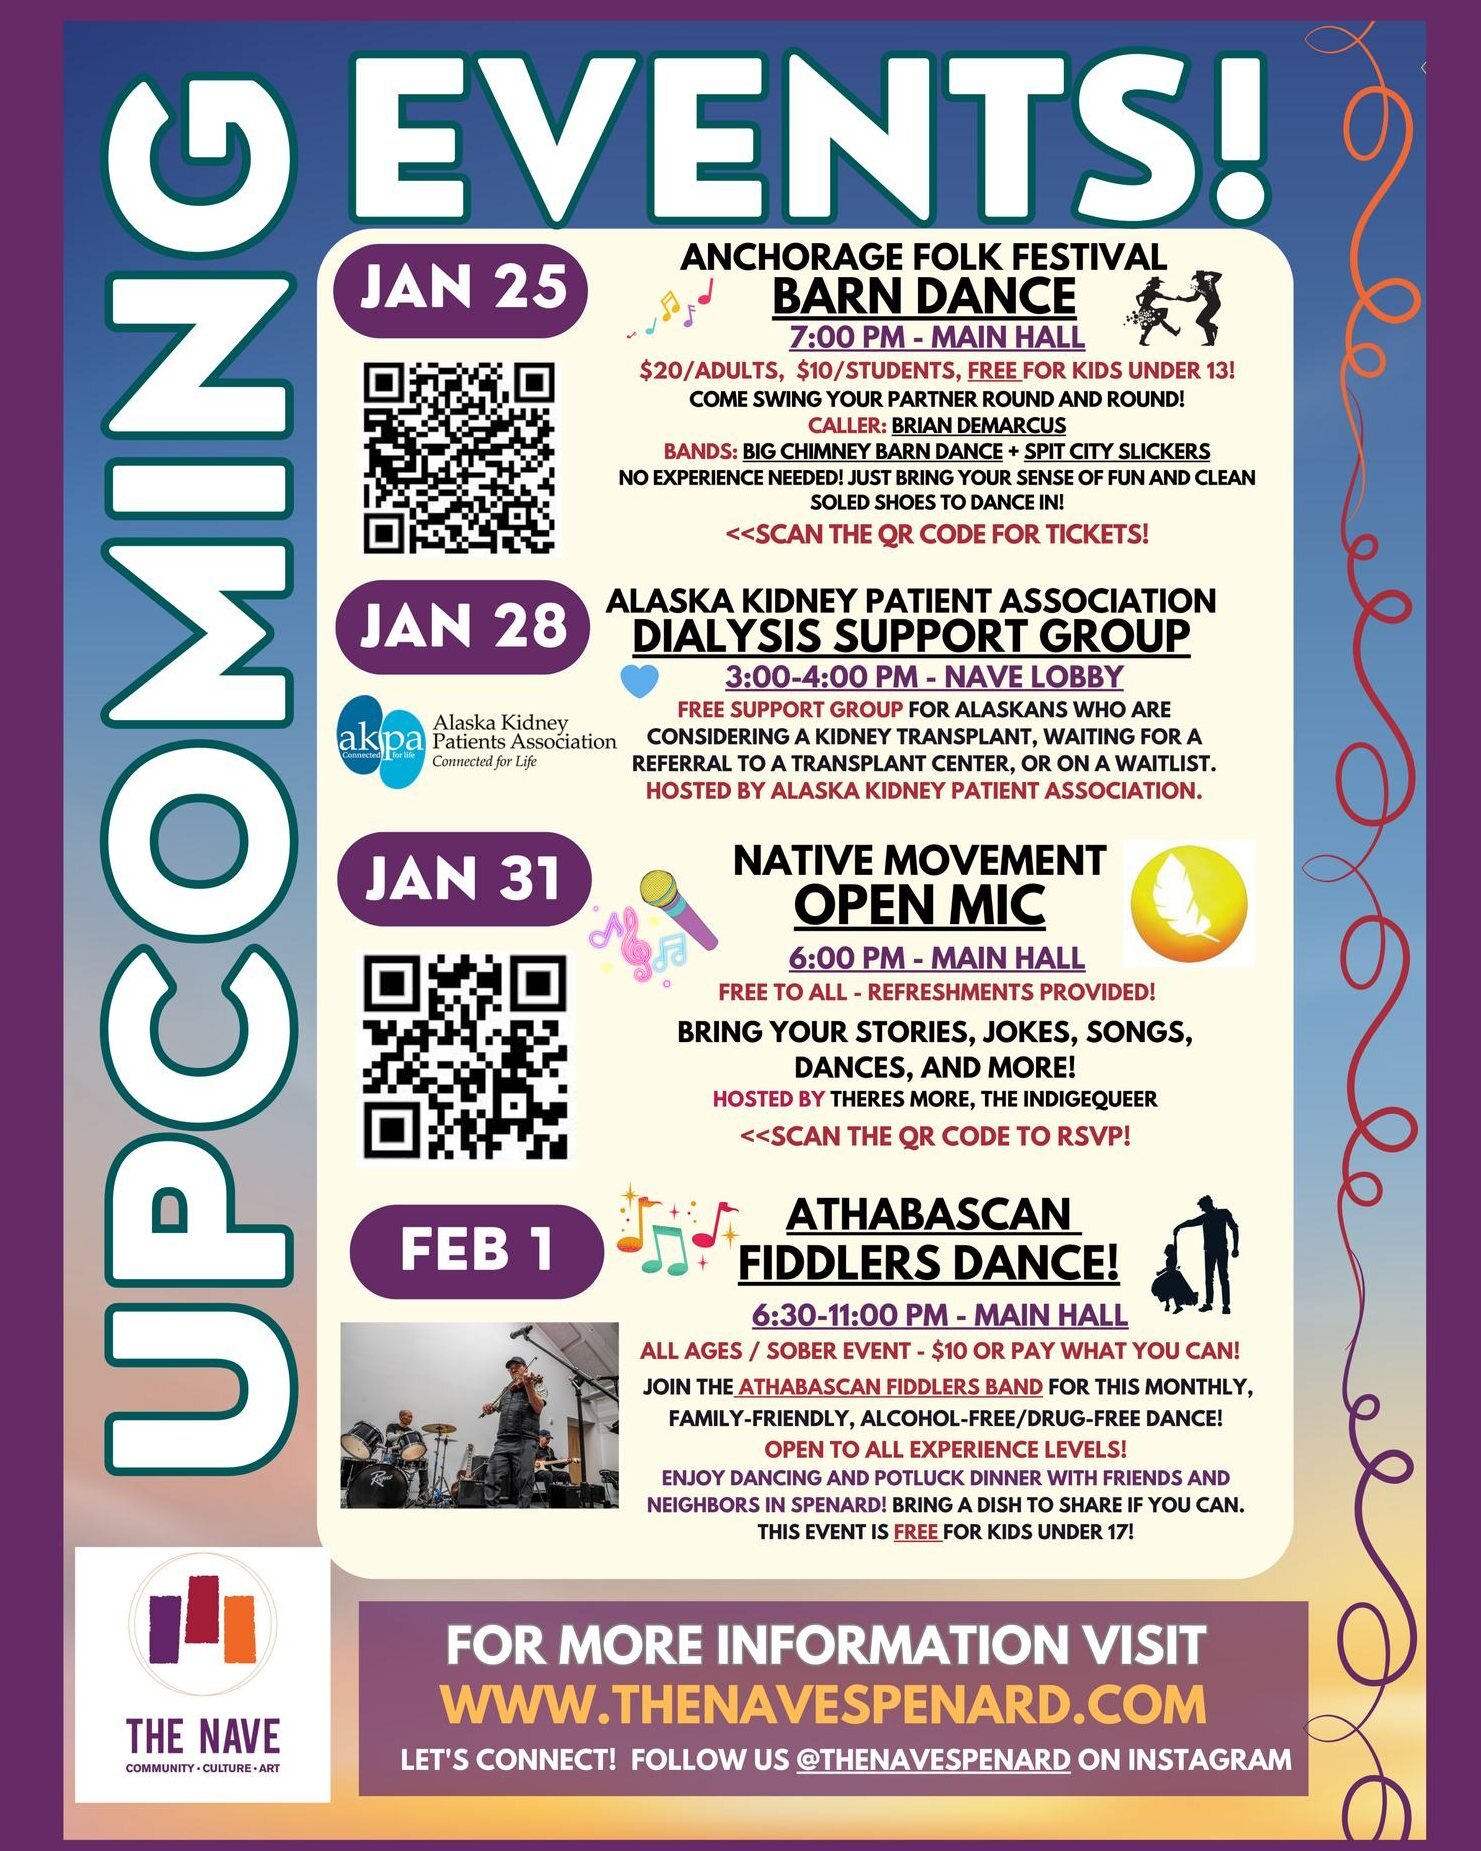 Worried about your dance card running out of steam as January winds down? Fear not! We have live music, dancing, open mic, and family-friendly events coming up in Spenard. There's also a new support group in town! Check out our Upcoming Events calend